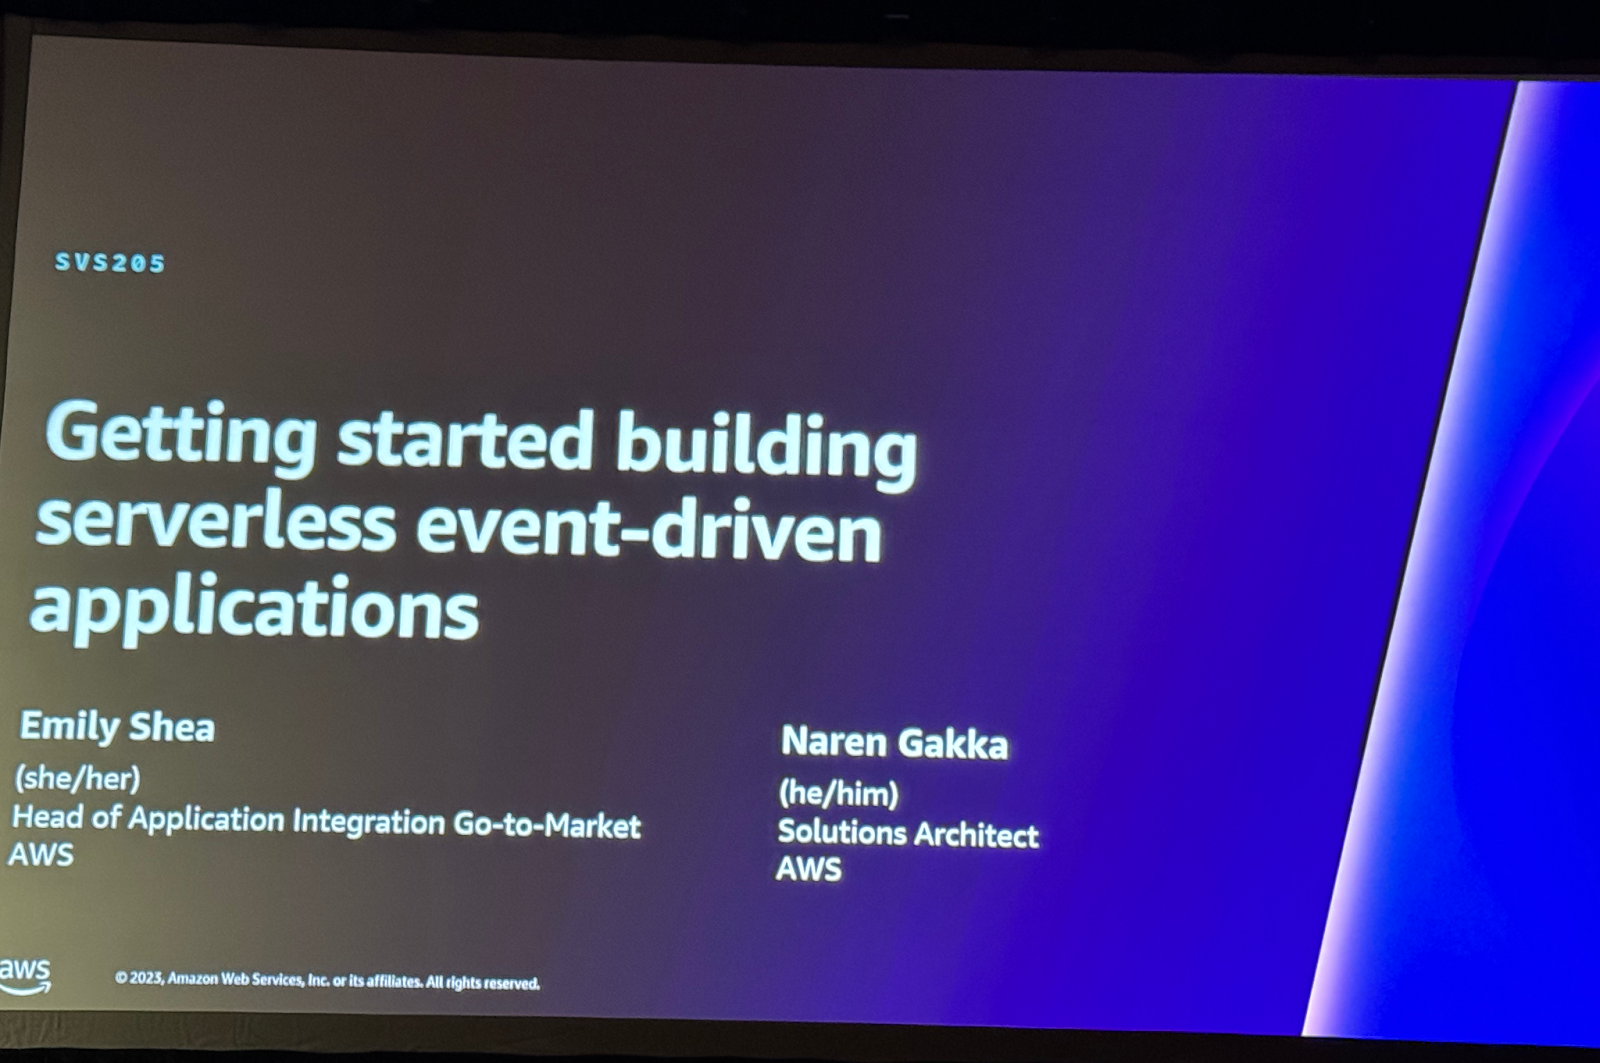 Getting started building serverless event-driven applications